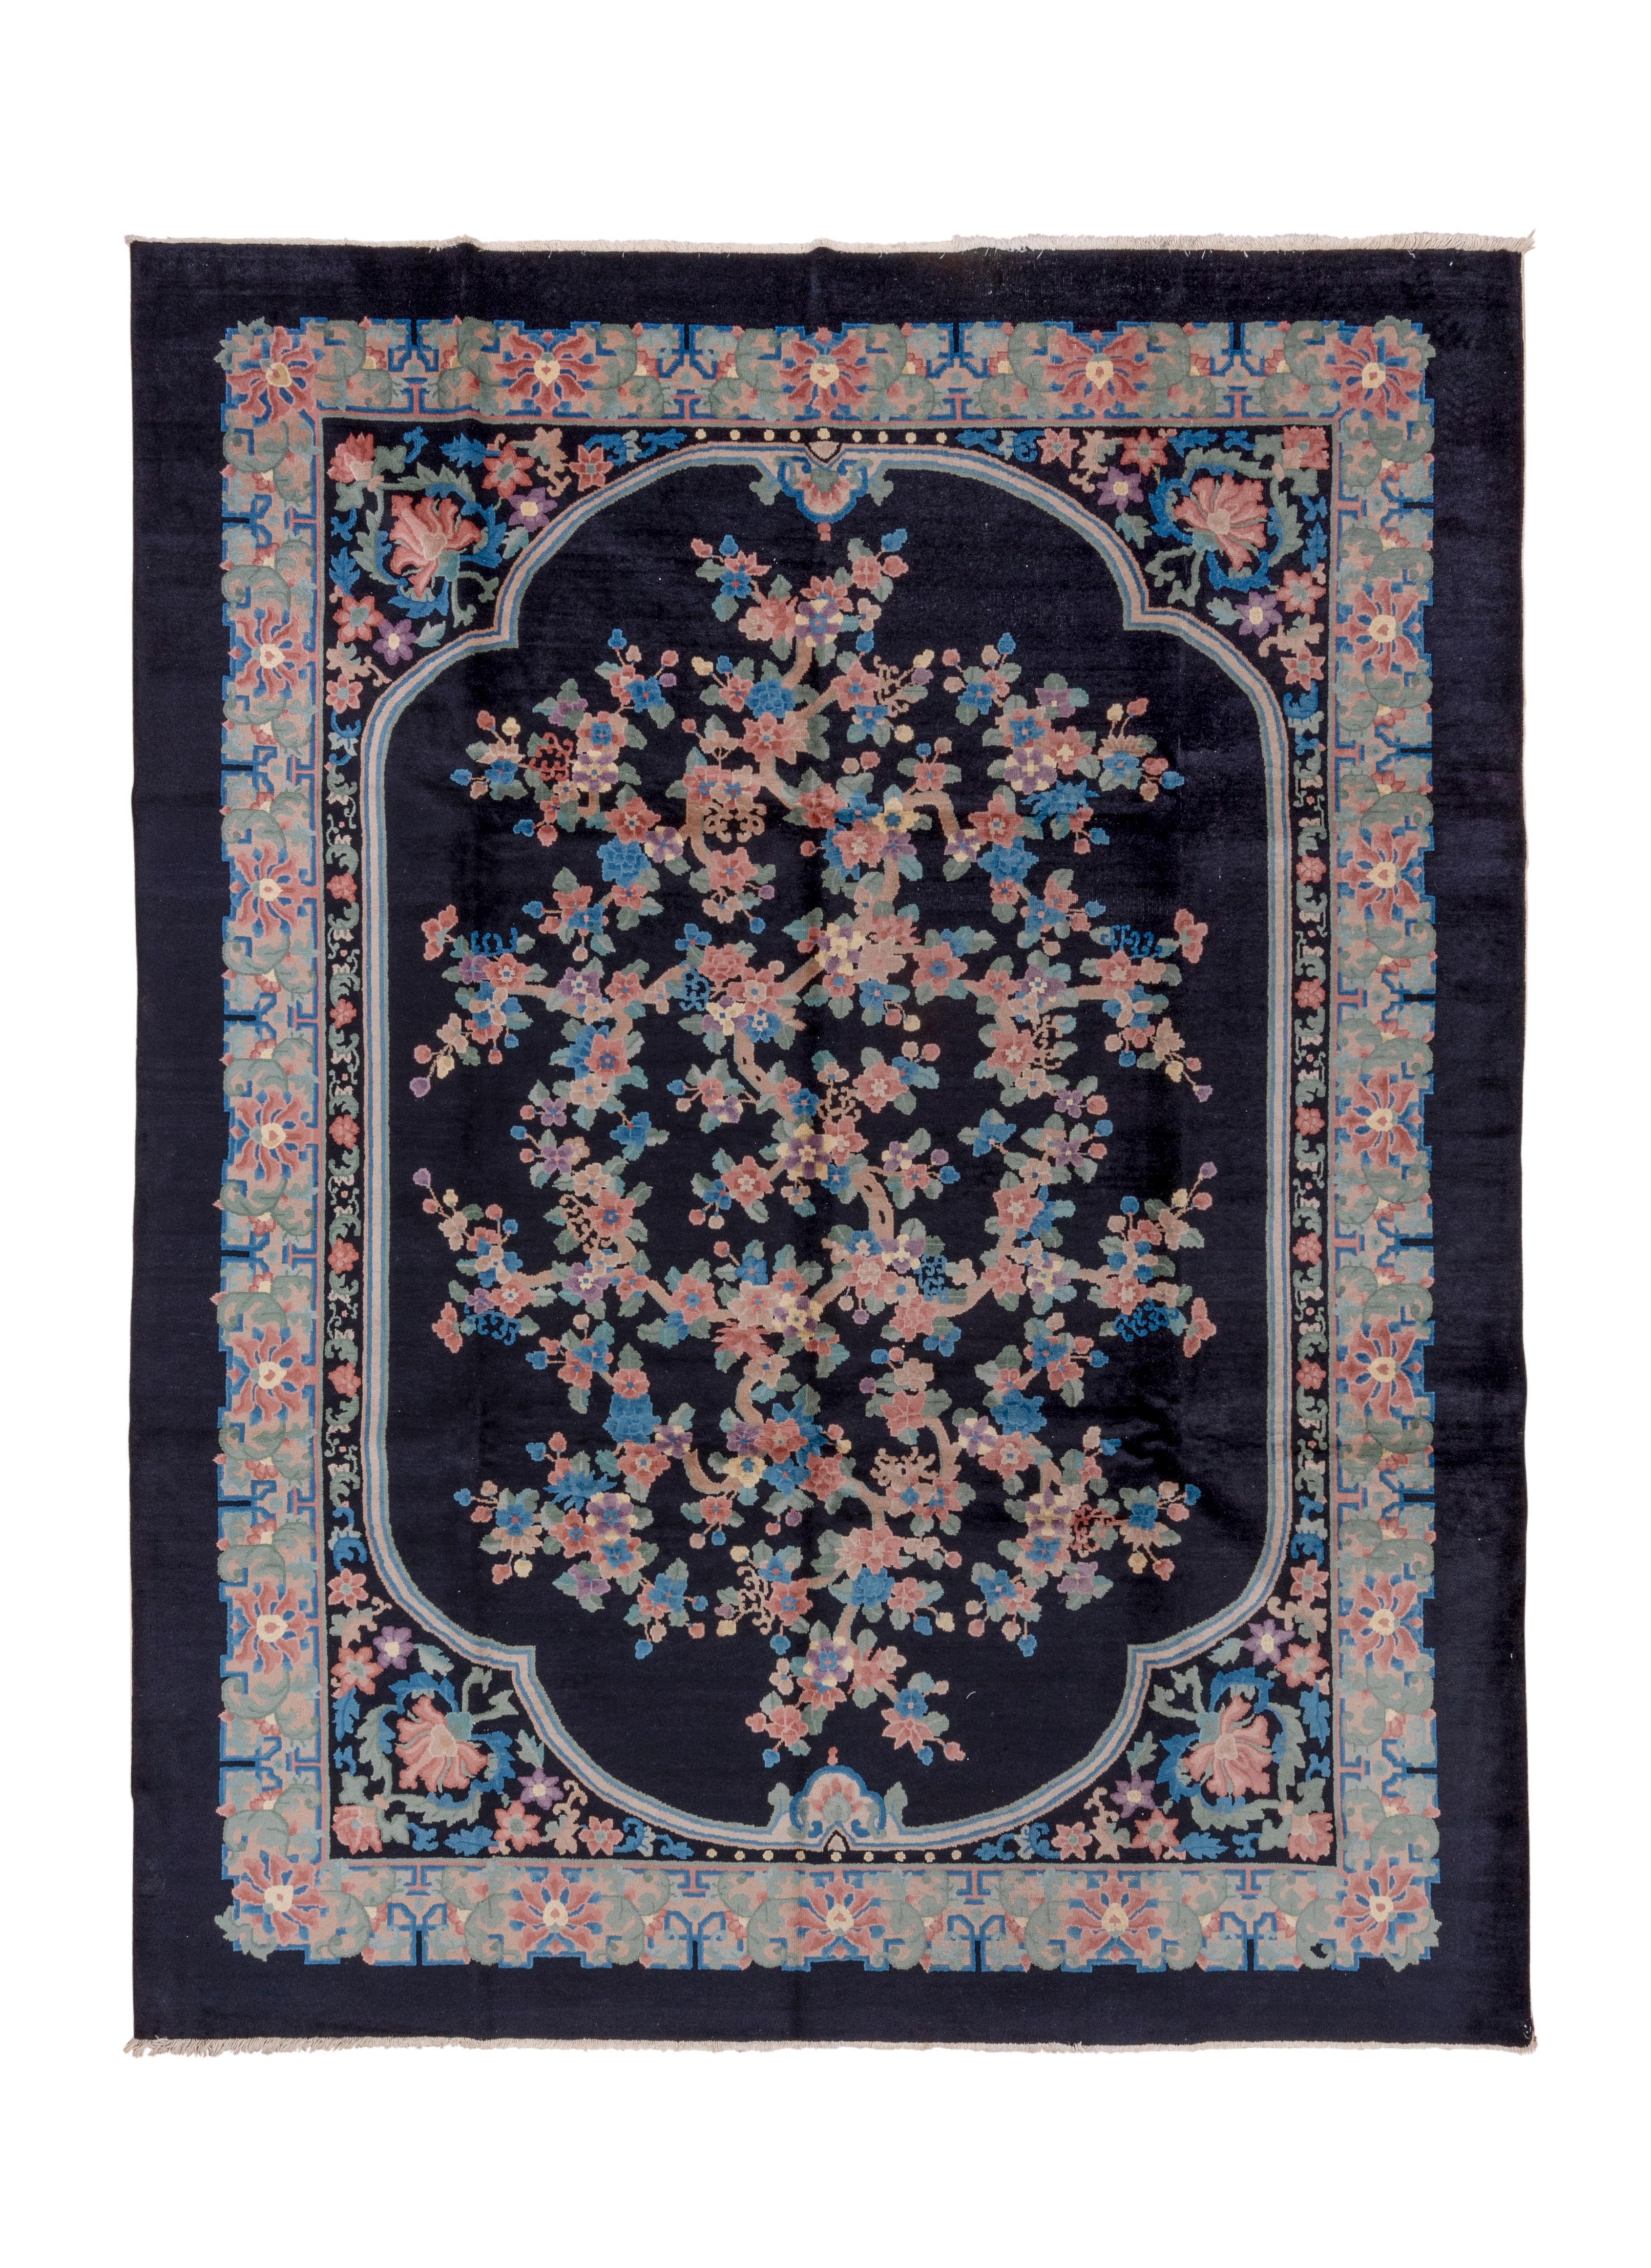 The shaped charcoal sub-field displays a complex flower, leaf and stem rootless creation, within corners with semi-peonies and flower trails alongside the sub-field. Cerulean blue border of peonies embedded in stylized foliage. Plain charcoal outer